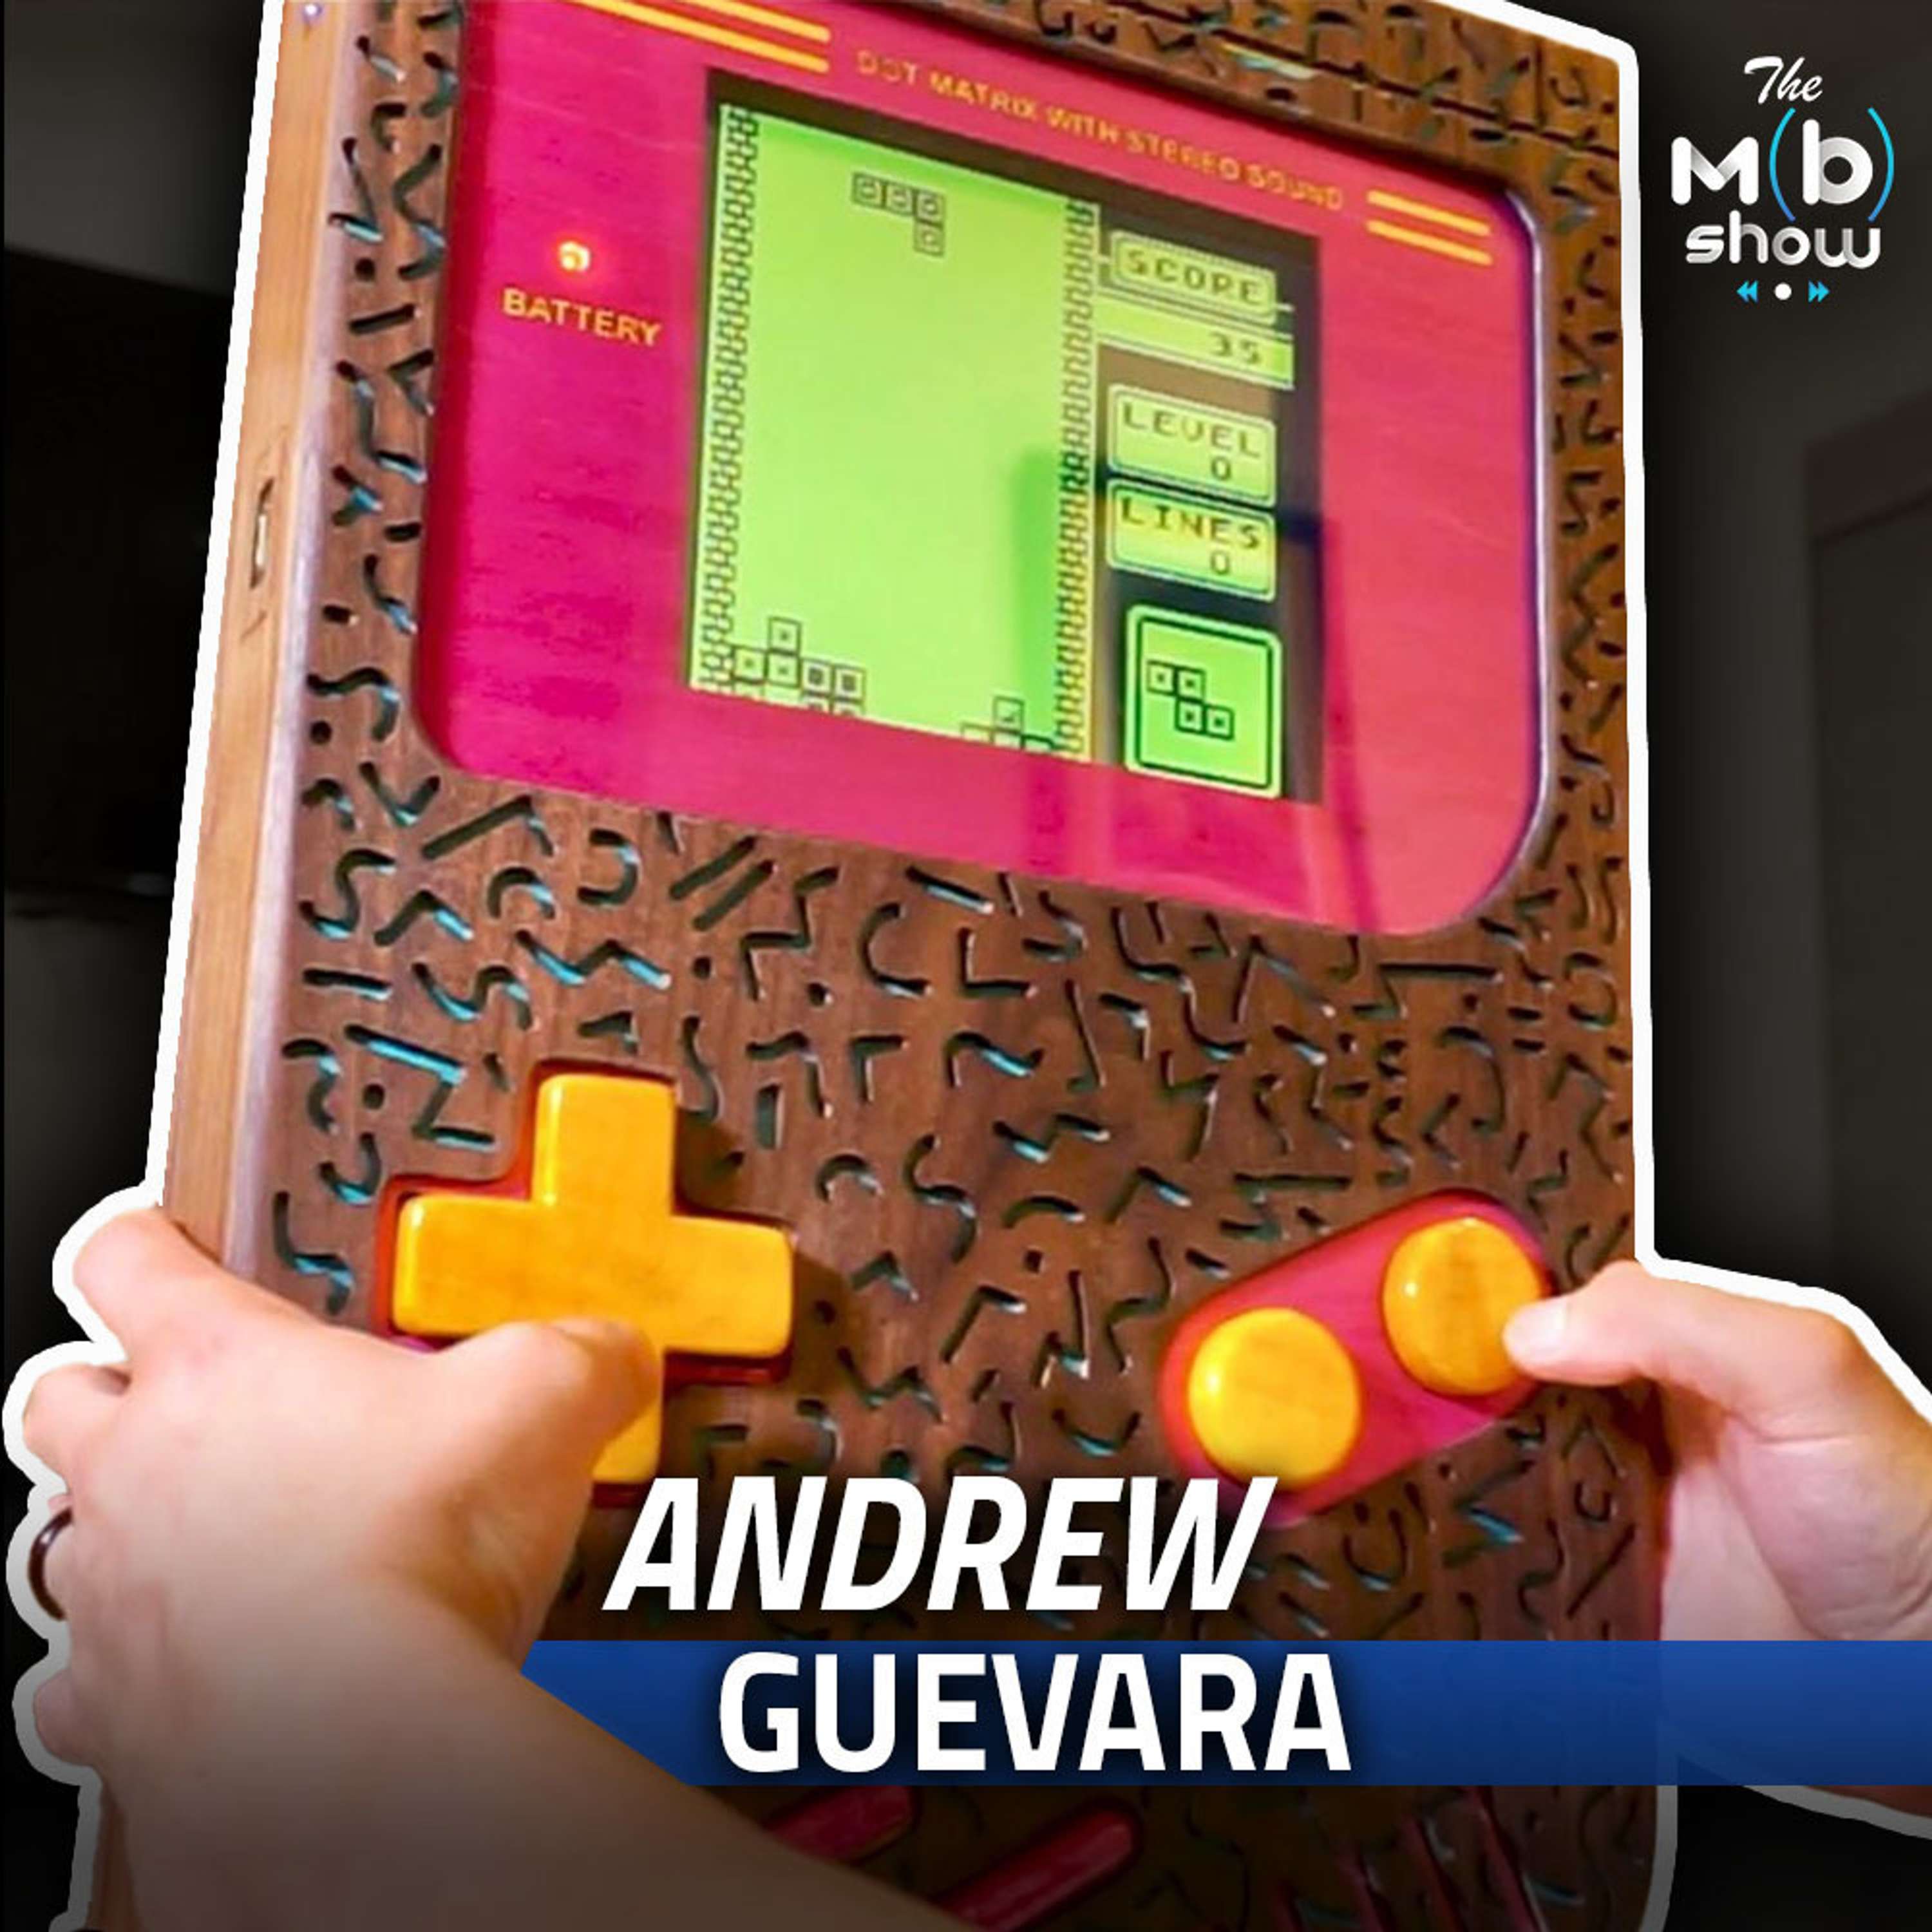 Building a Playable Wooden Gameboy with Andrew Guevara